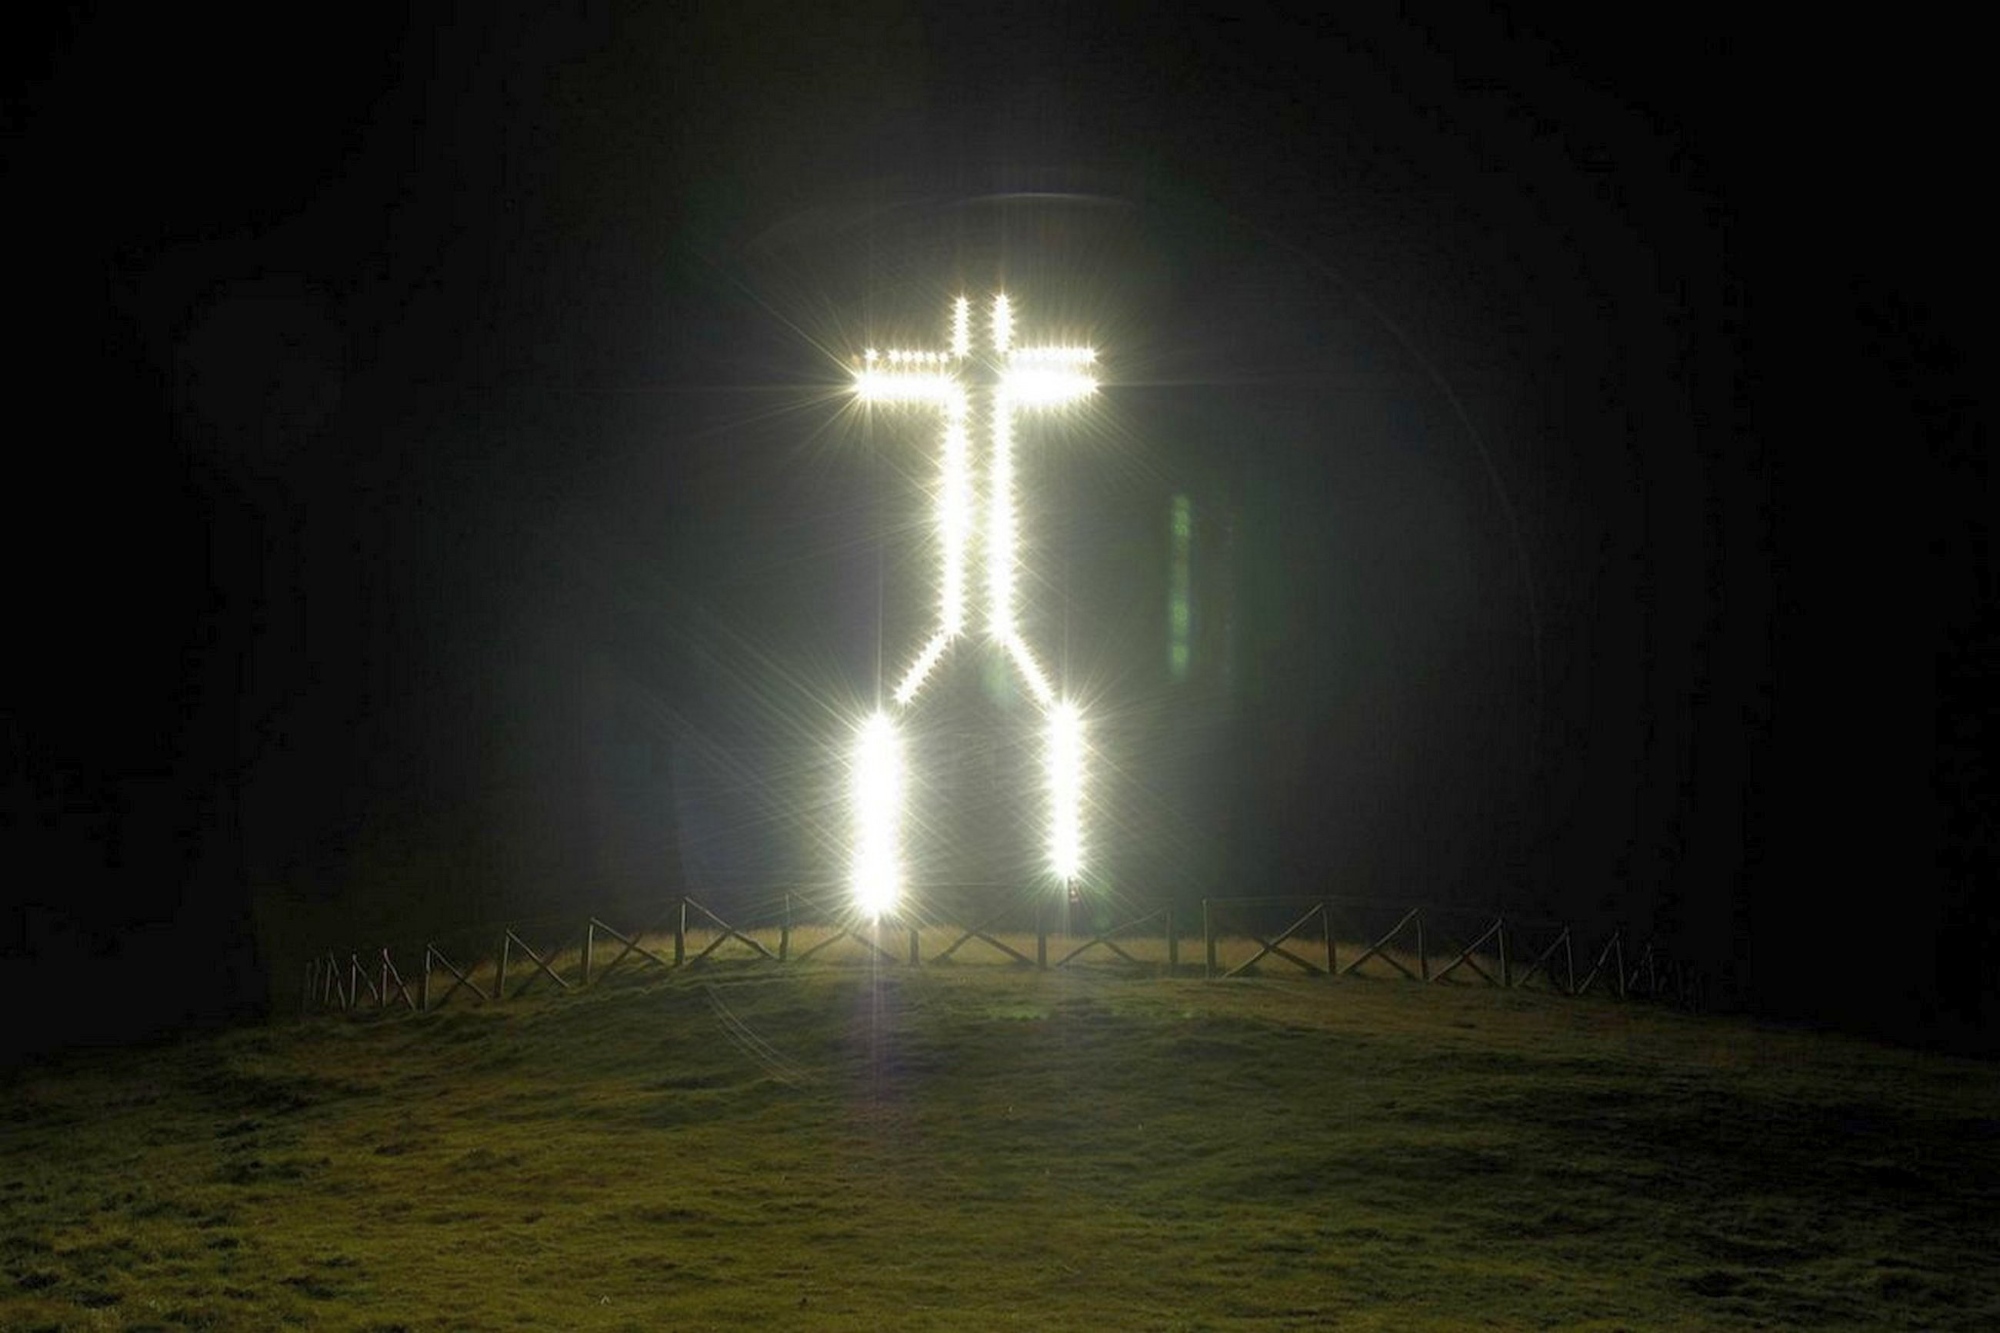 An evening walk to reach the Pratomagno Cross and admire the starry sky